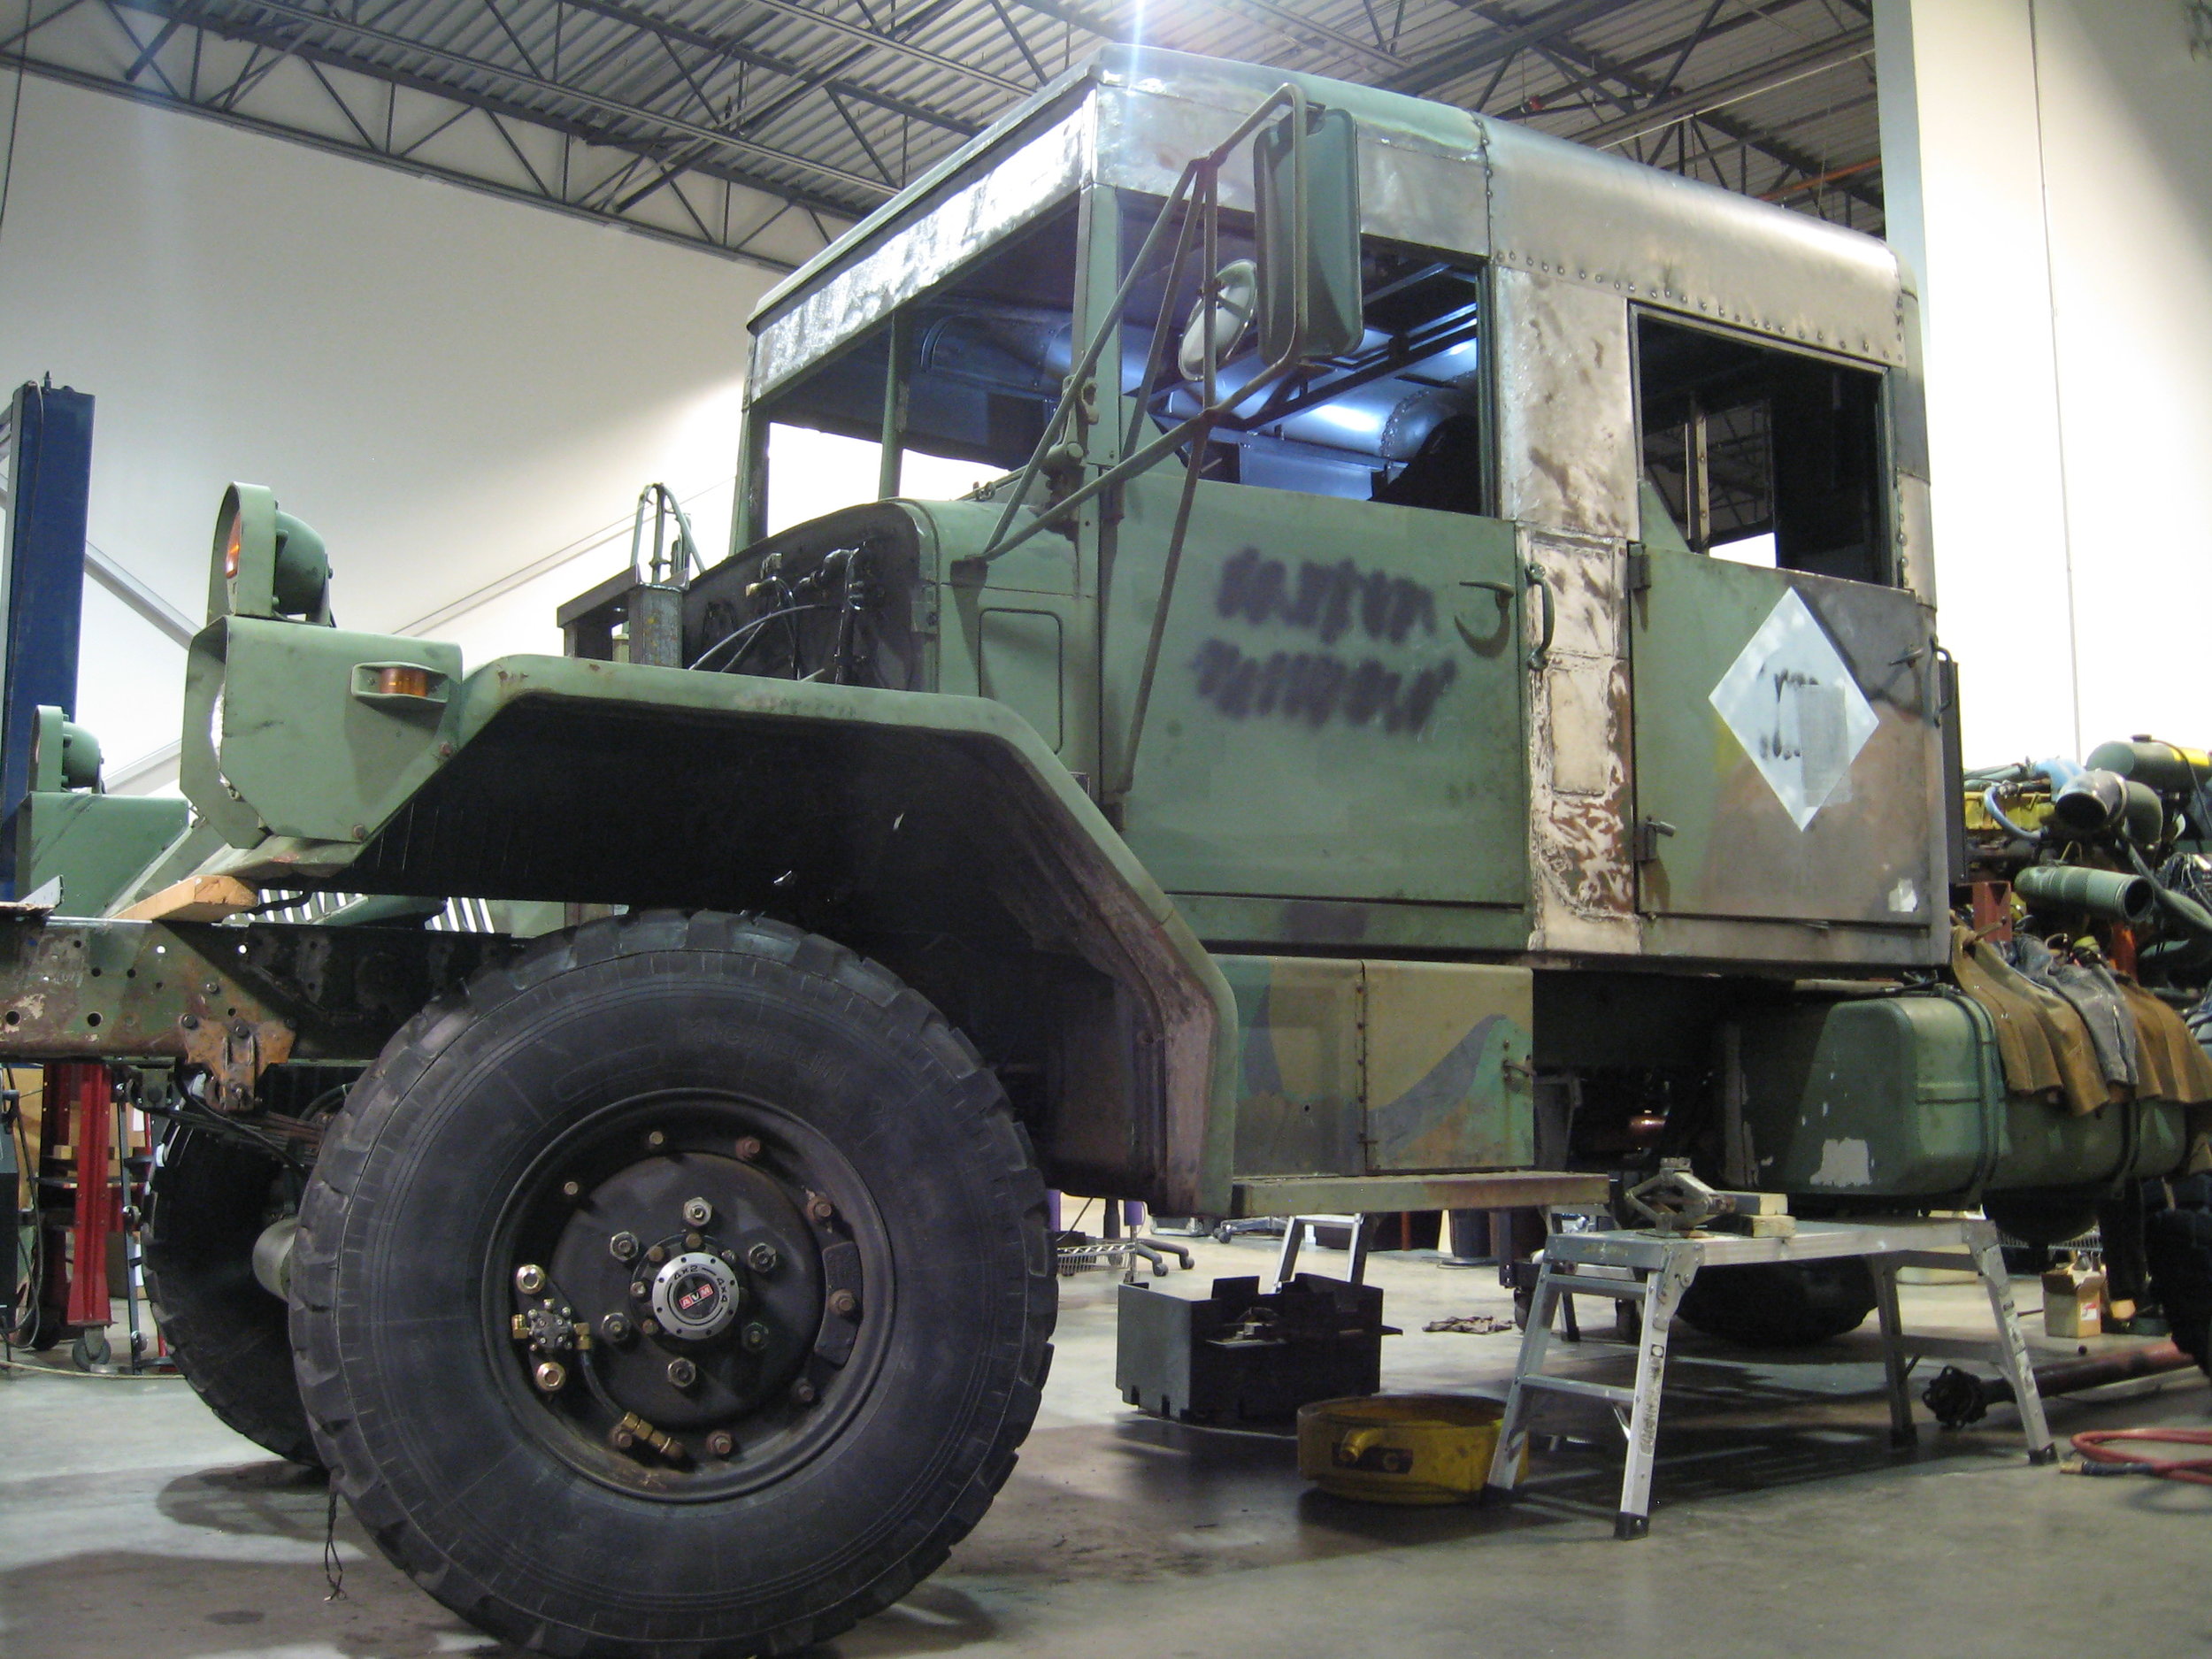  Two M35 cabs were sectioned and joined to fabricate a crew-cab with a raised hard roof. The cab was designed to accommodate a driver and two operators, and a contained computer compartment, which was cooled and pressurized by a roof mounted A/C unit